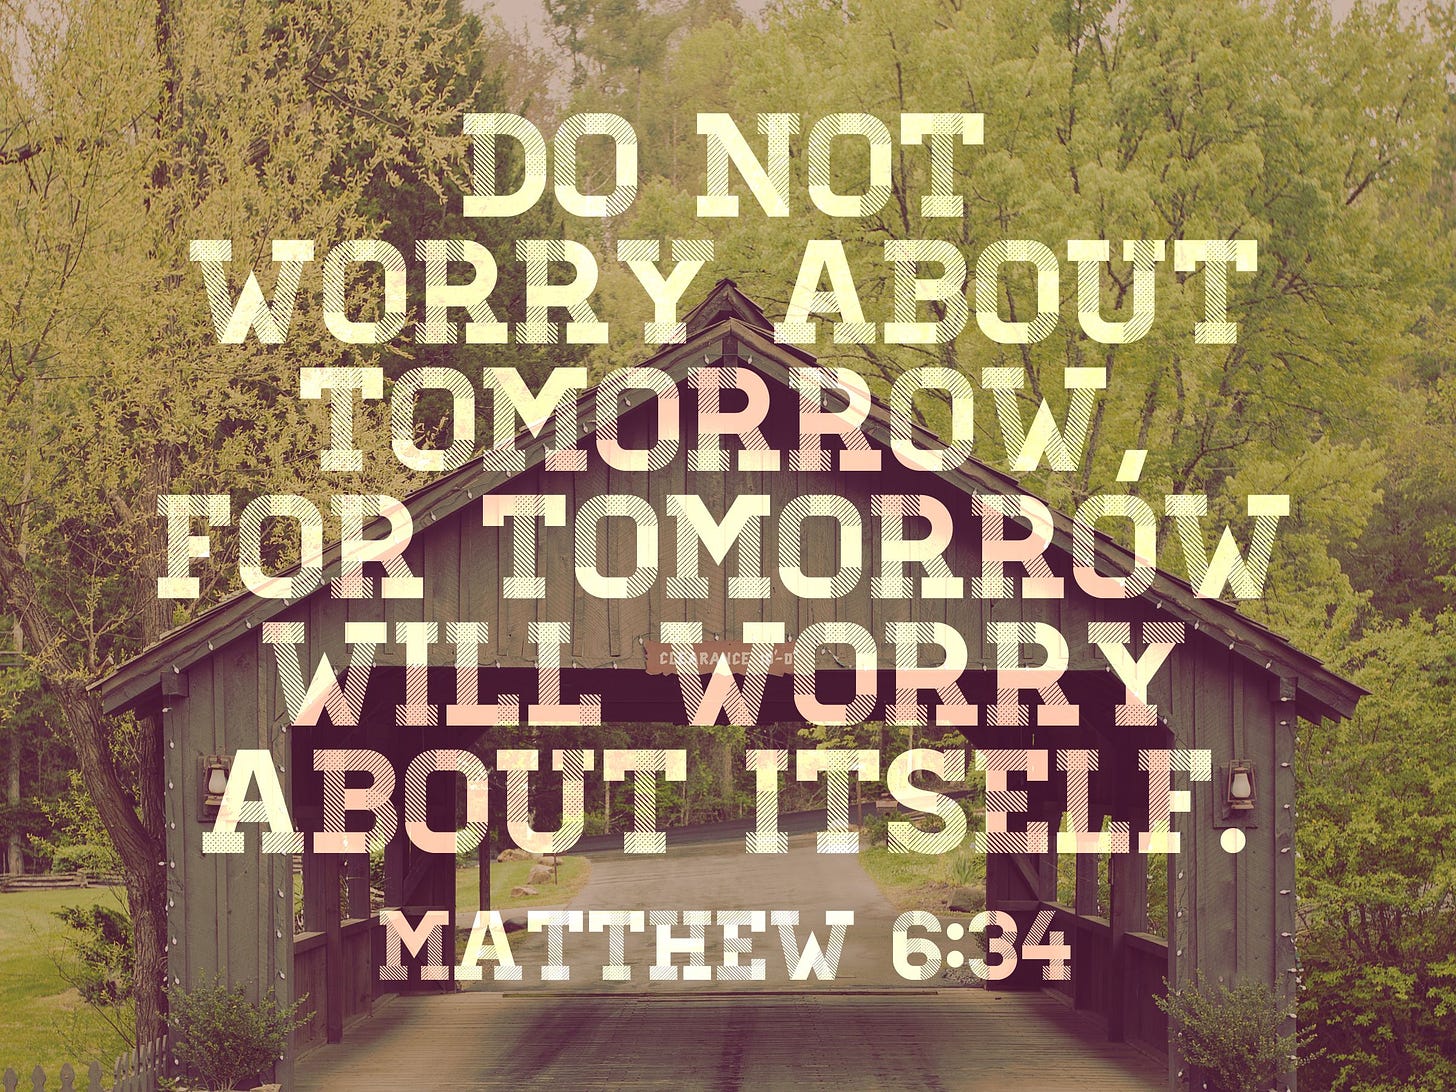 Do not worry about tomorrow, for tomorrow will worry about itself ...